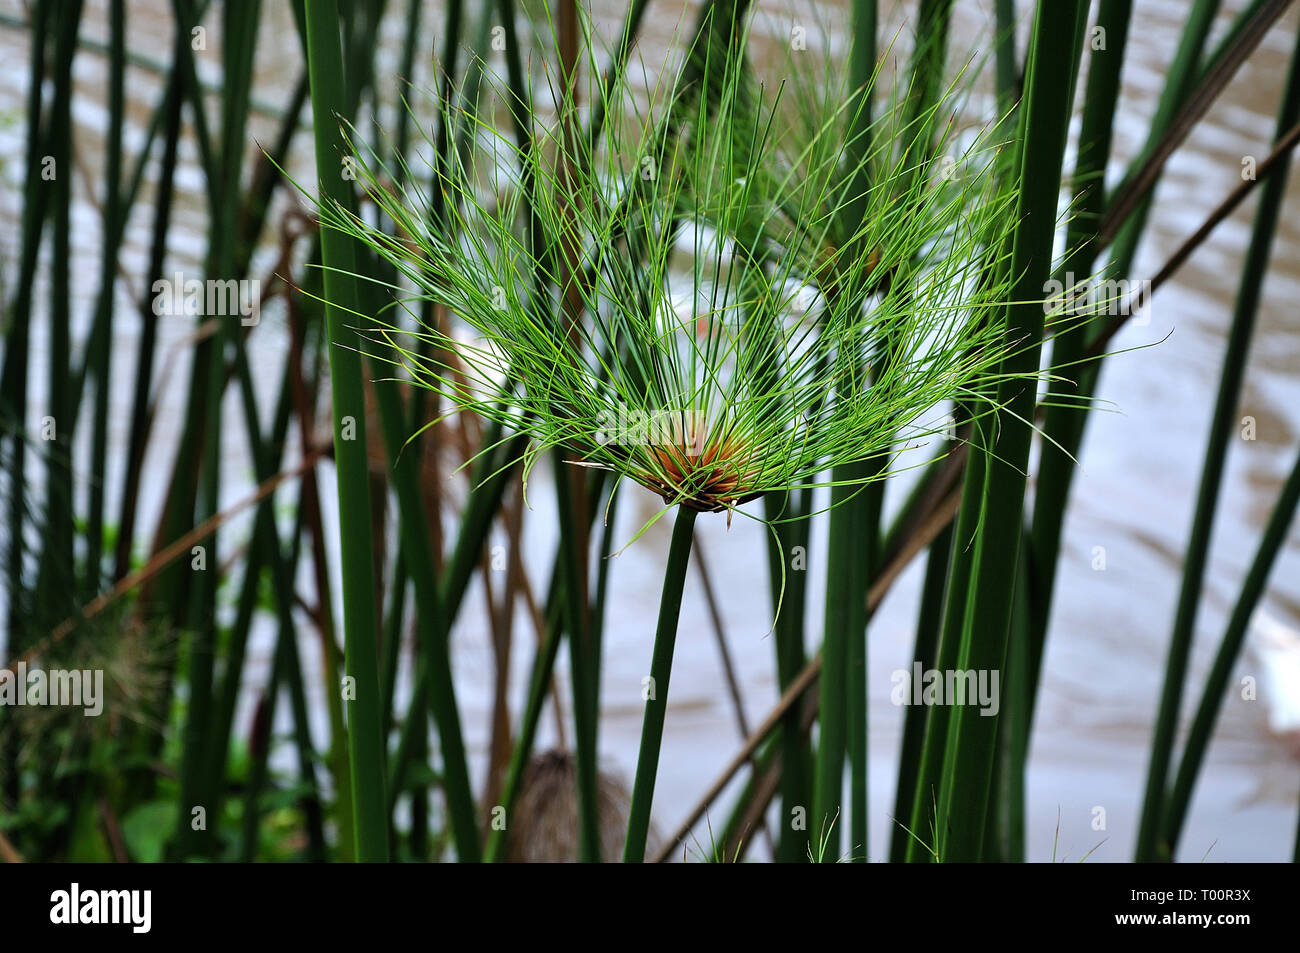 close-up of tender green feather duster of a papyrus sedge at lake shore Stock Photo